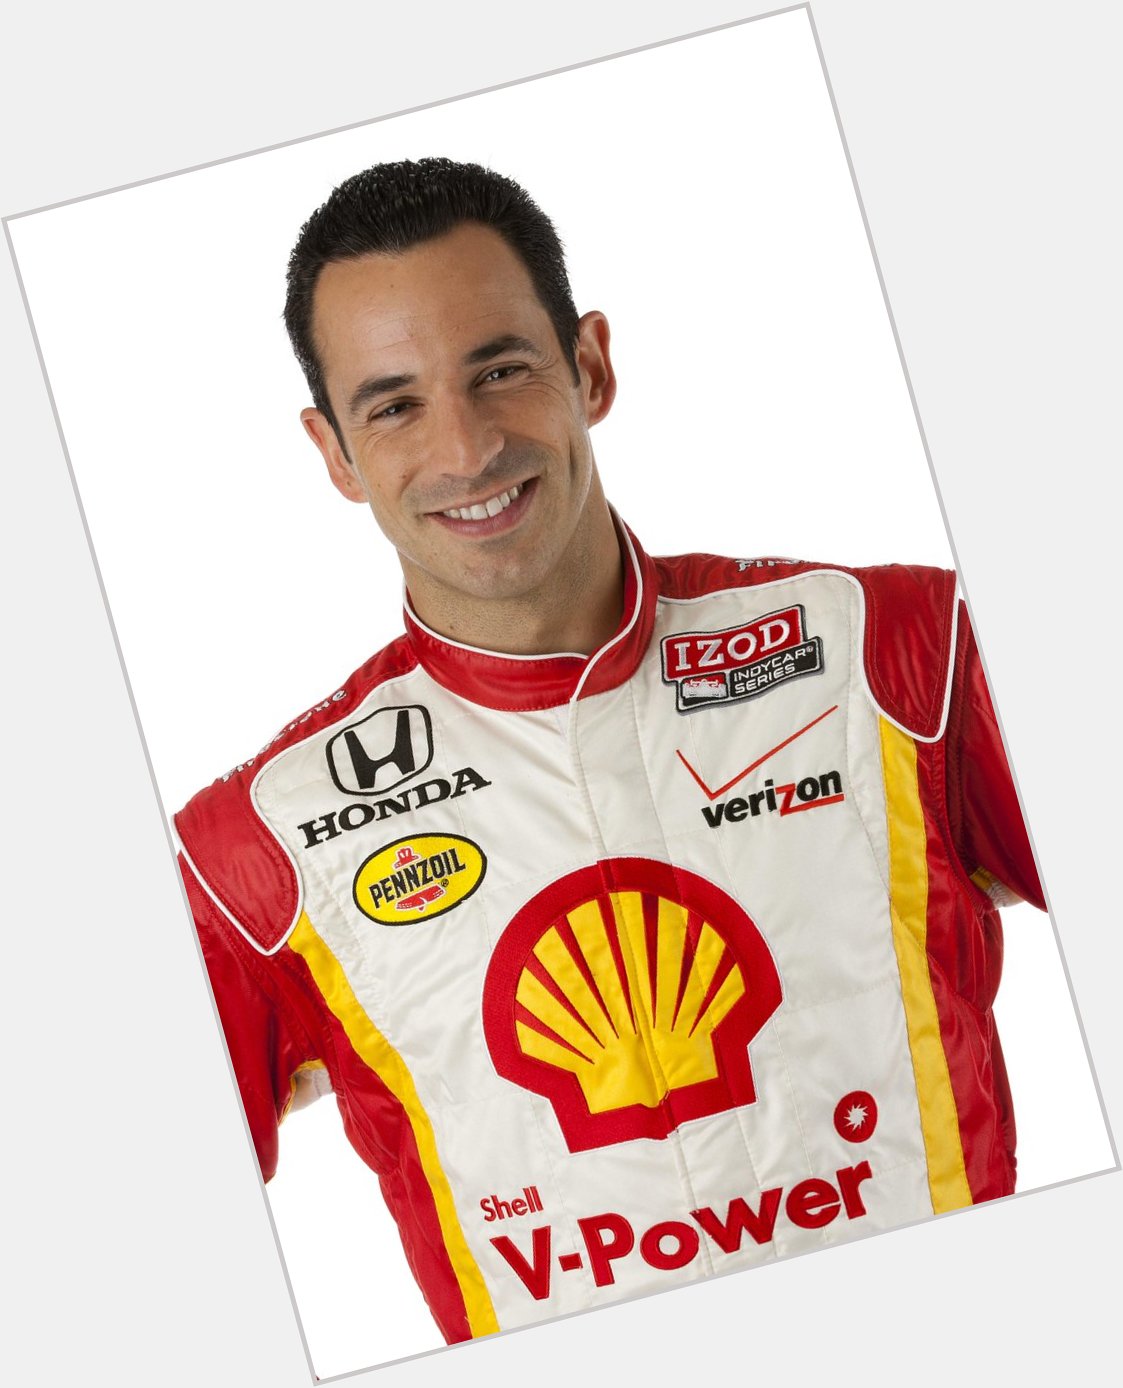 Happy 40th birthday to the one and only Helio Castroneves! Congratulations 